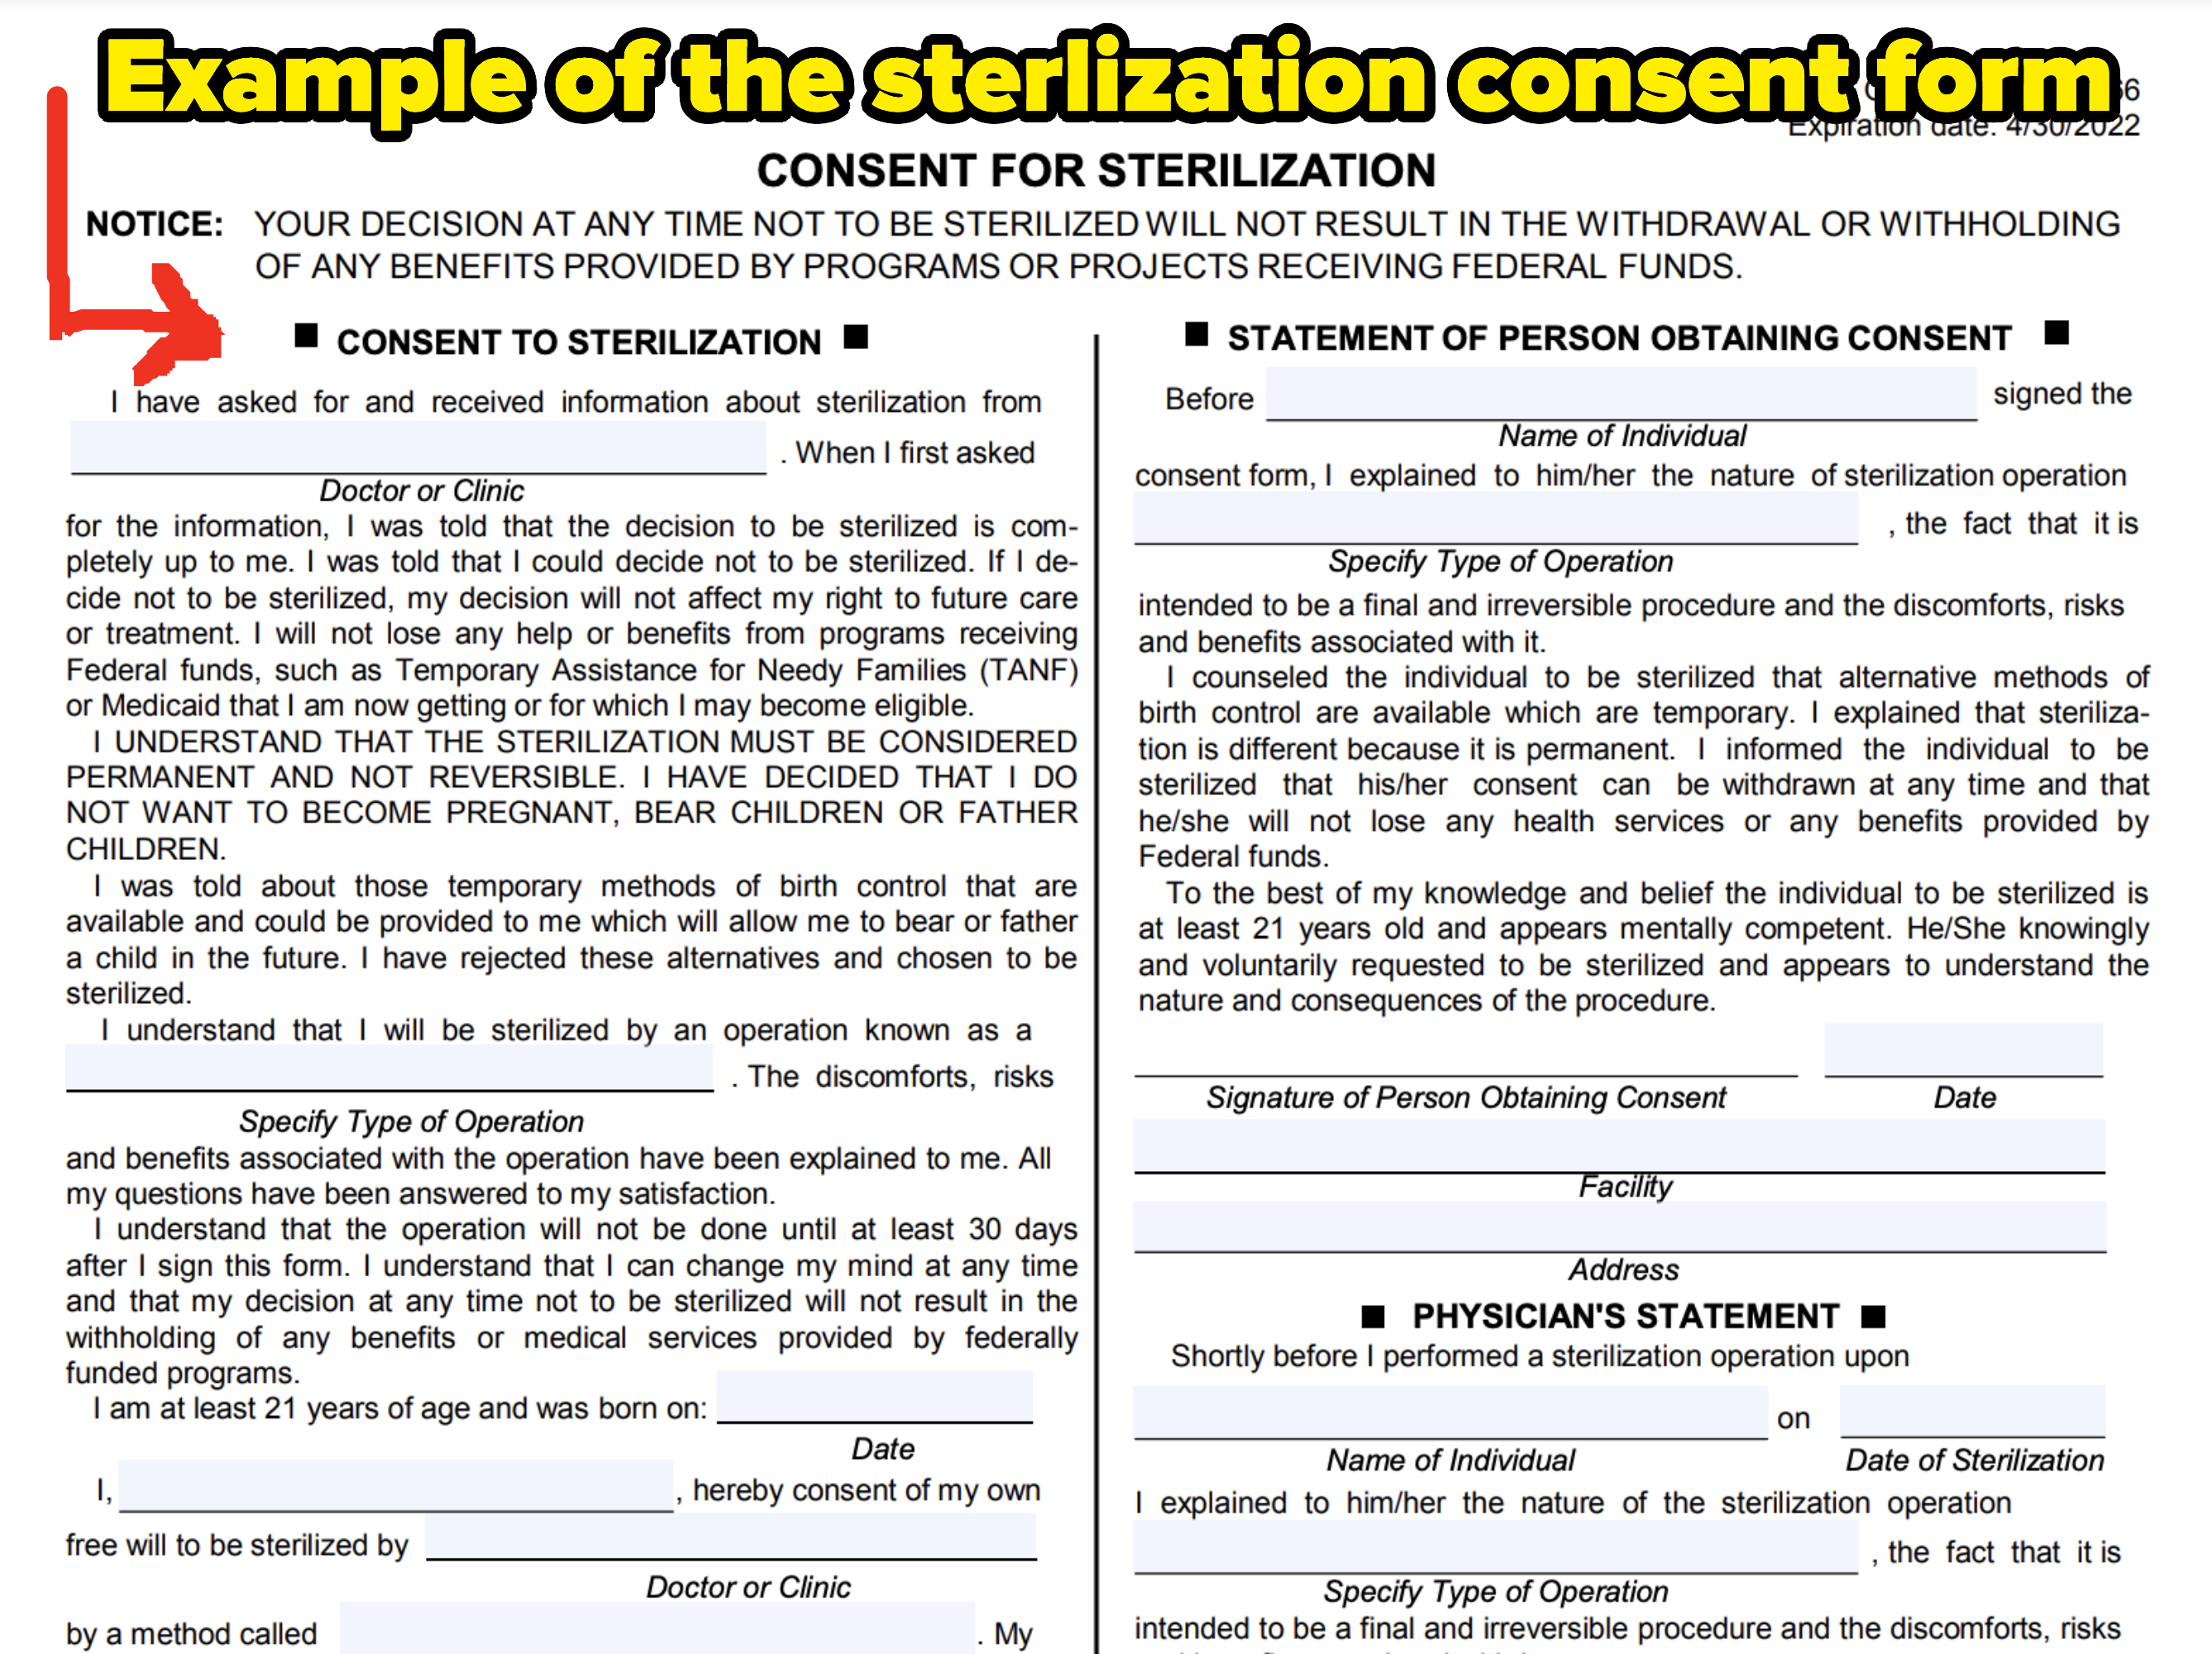 Example of a sterilization consent form rom 2022